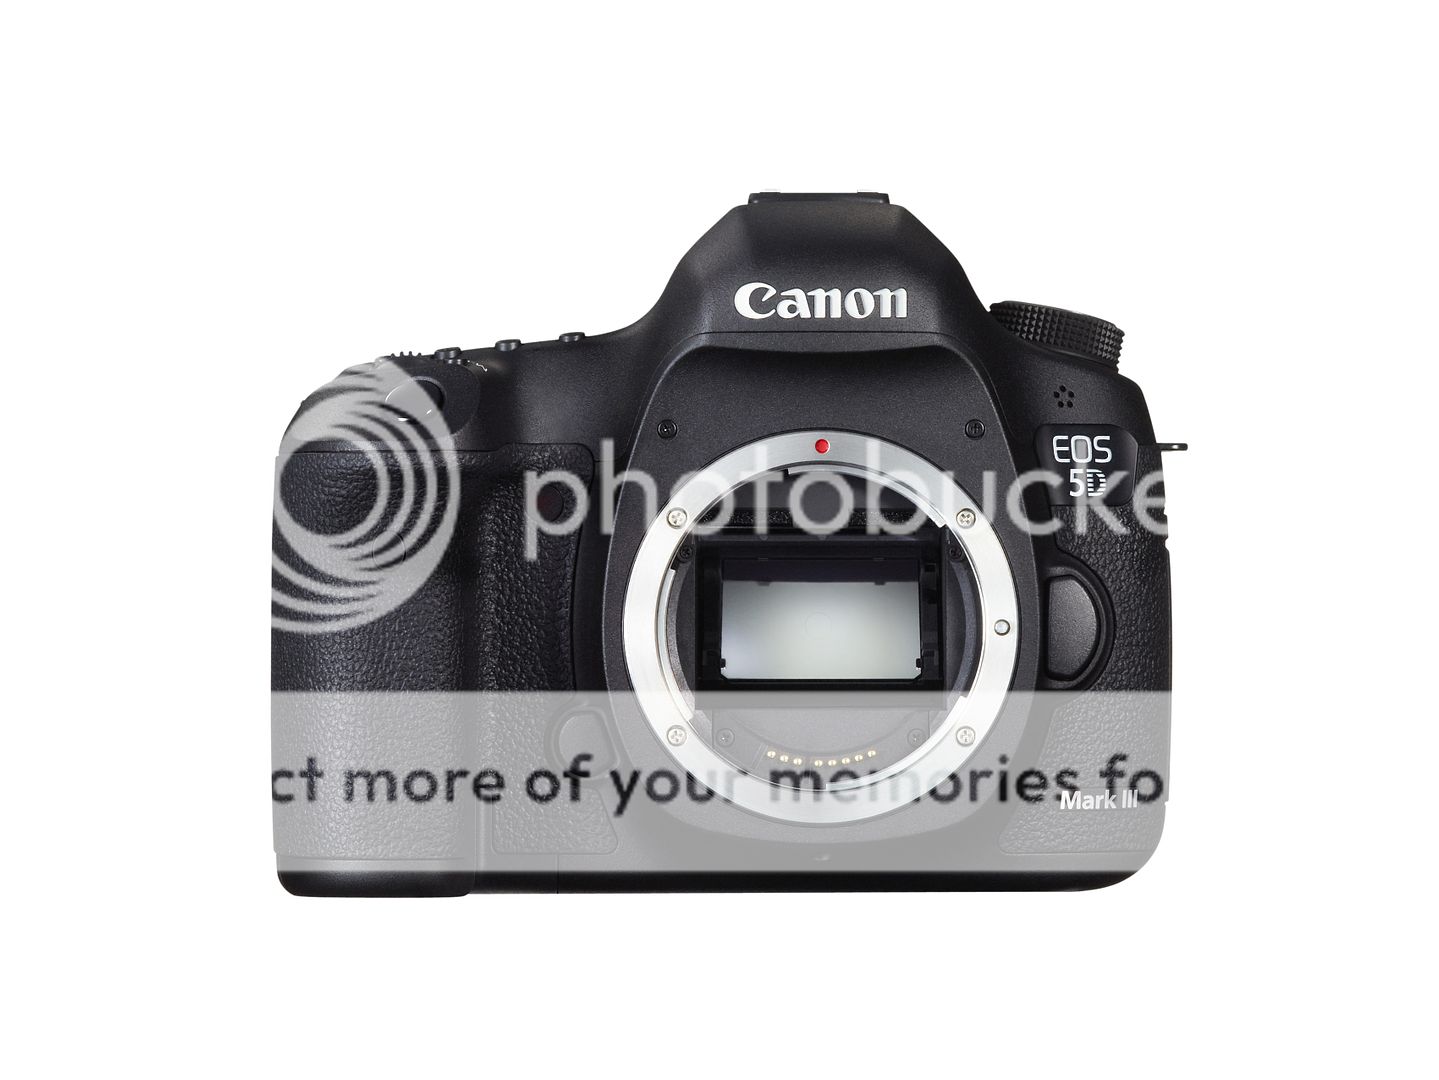 It's getting crazy: Canon EOS 5D Mark III for ridiculous $2.799